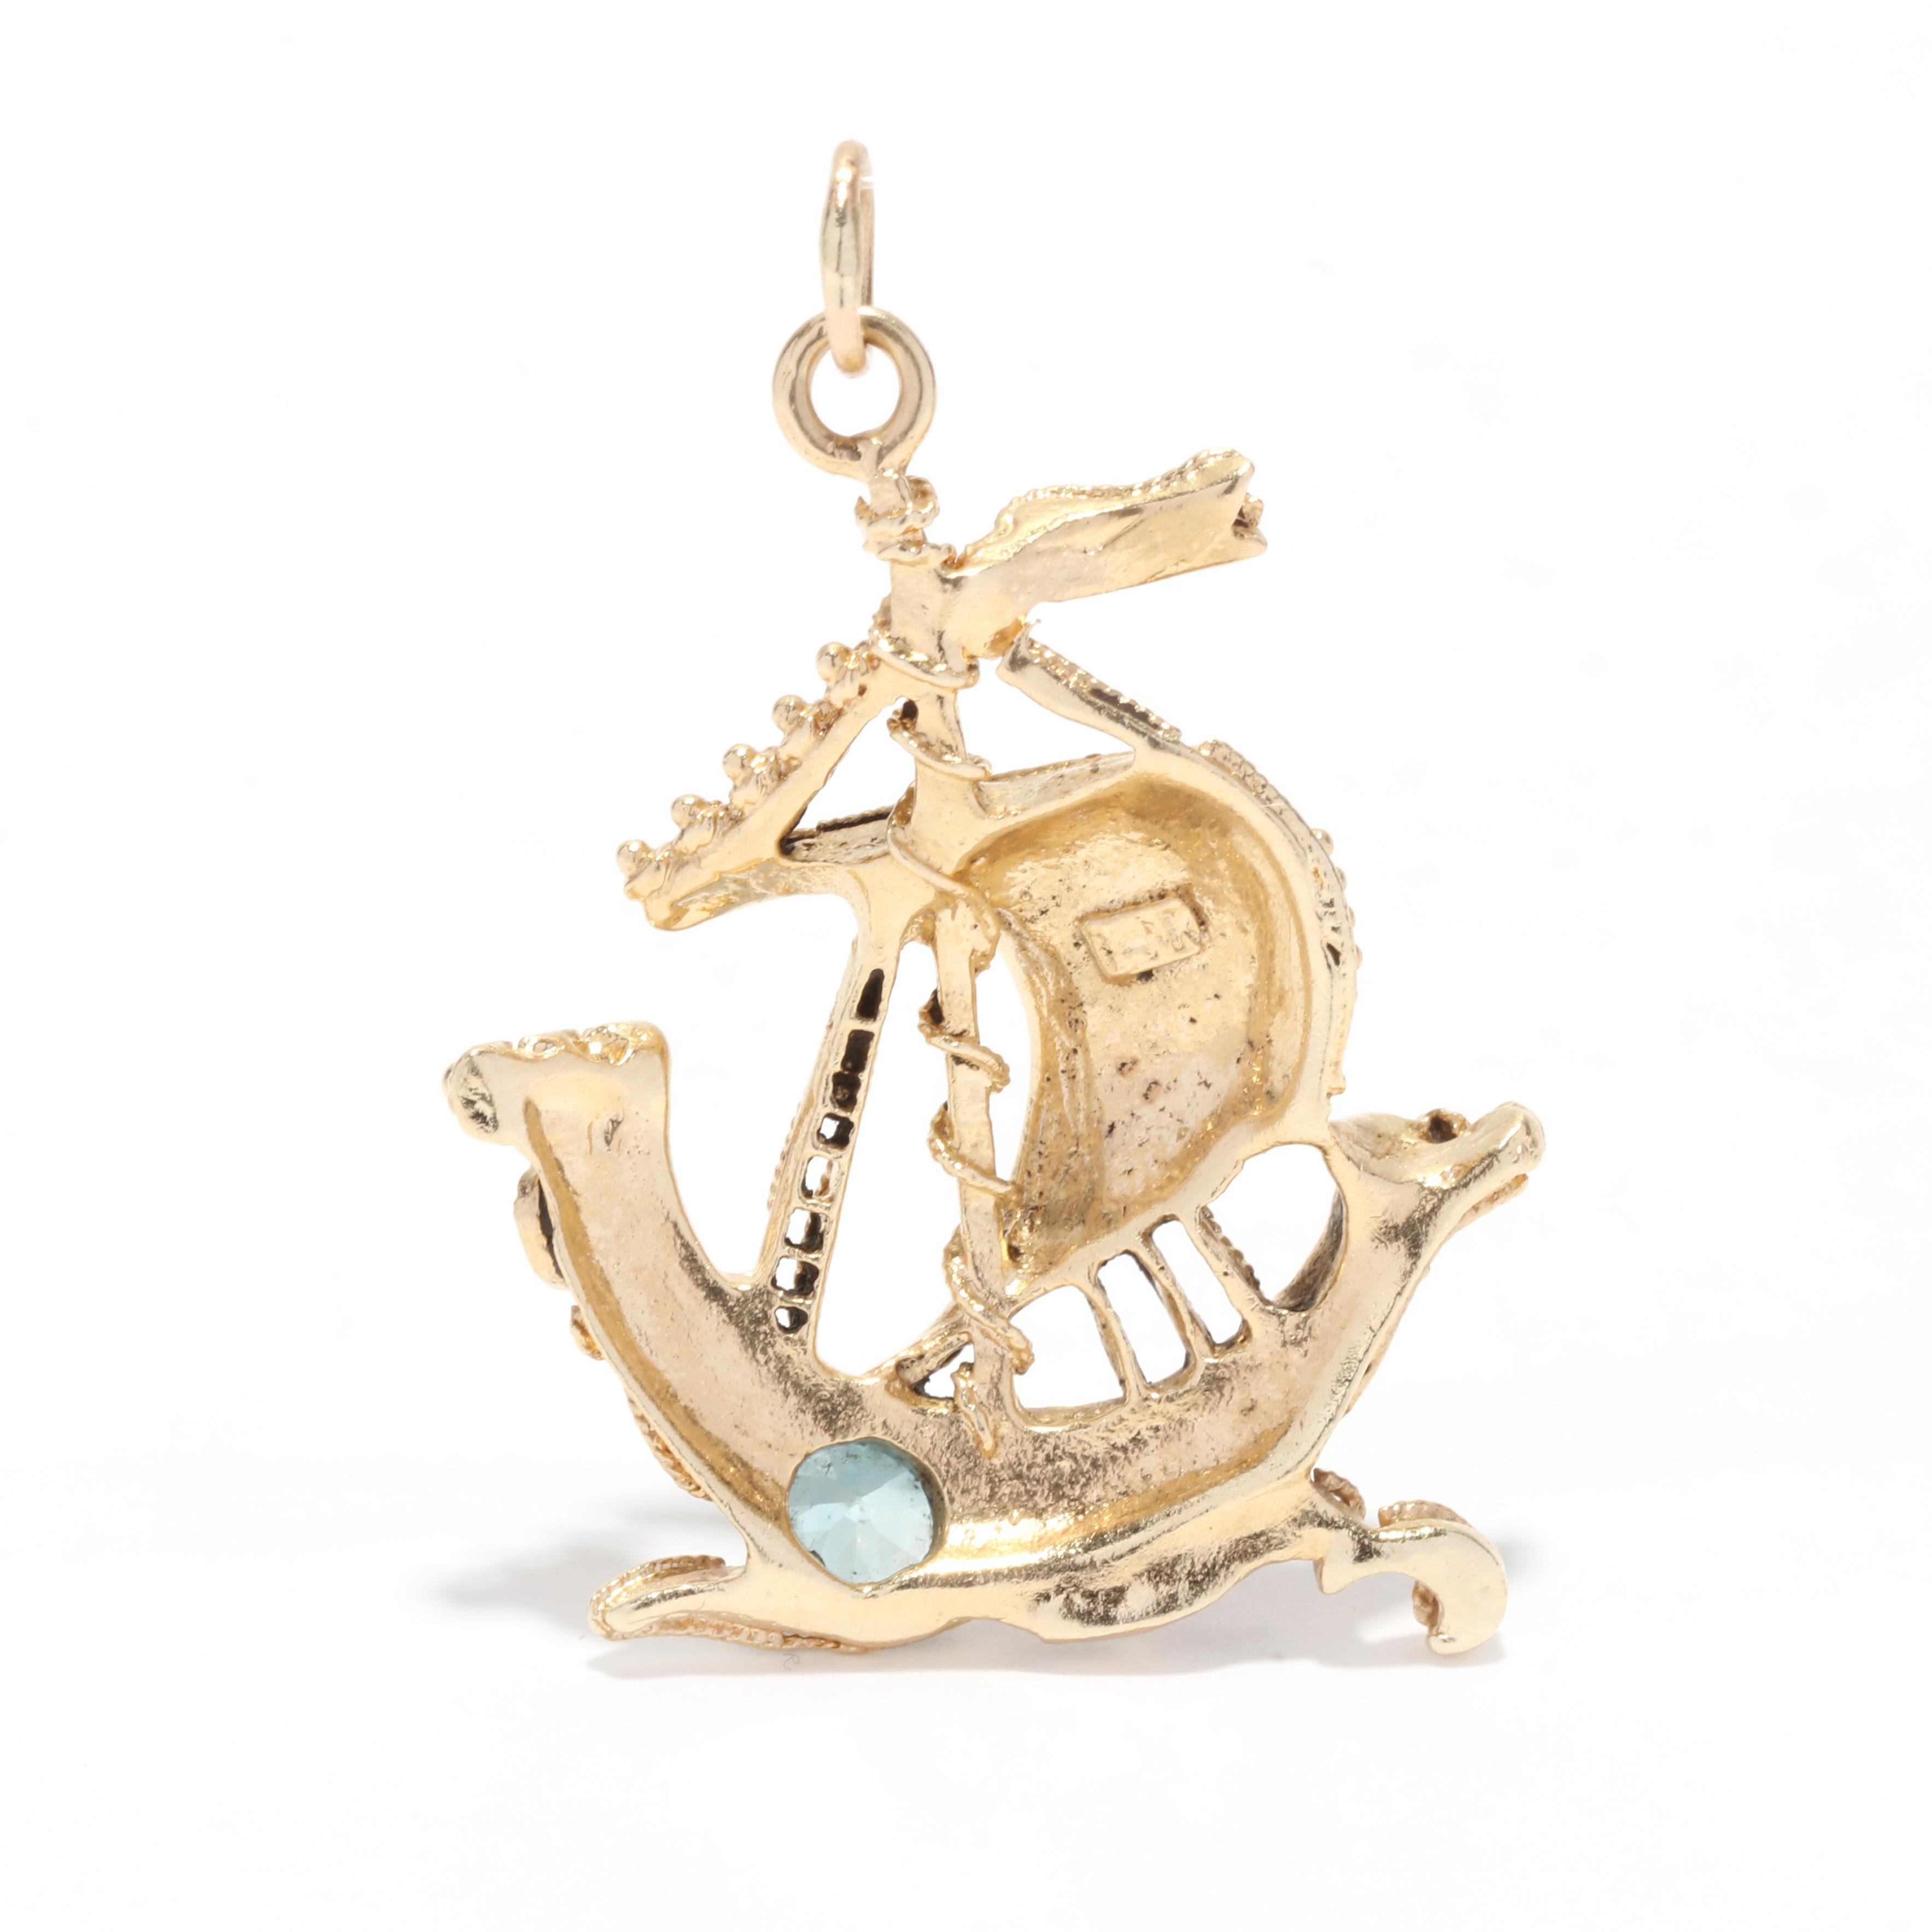 A mid-century 14 karat yellow gold gem-set viking ship charm. This medium size charm features a viking ship motif with applied gold swirl detailing and set with gemstones such as blue zircon, coral and colored glass stones.

Stones: 
- blue zircon,